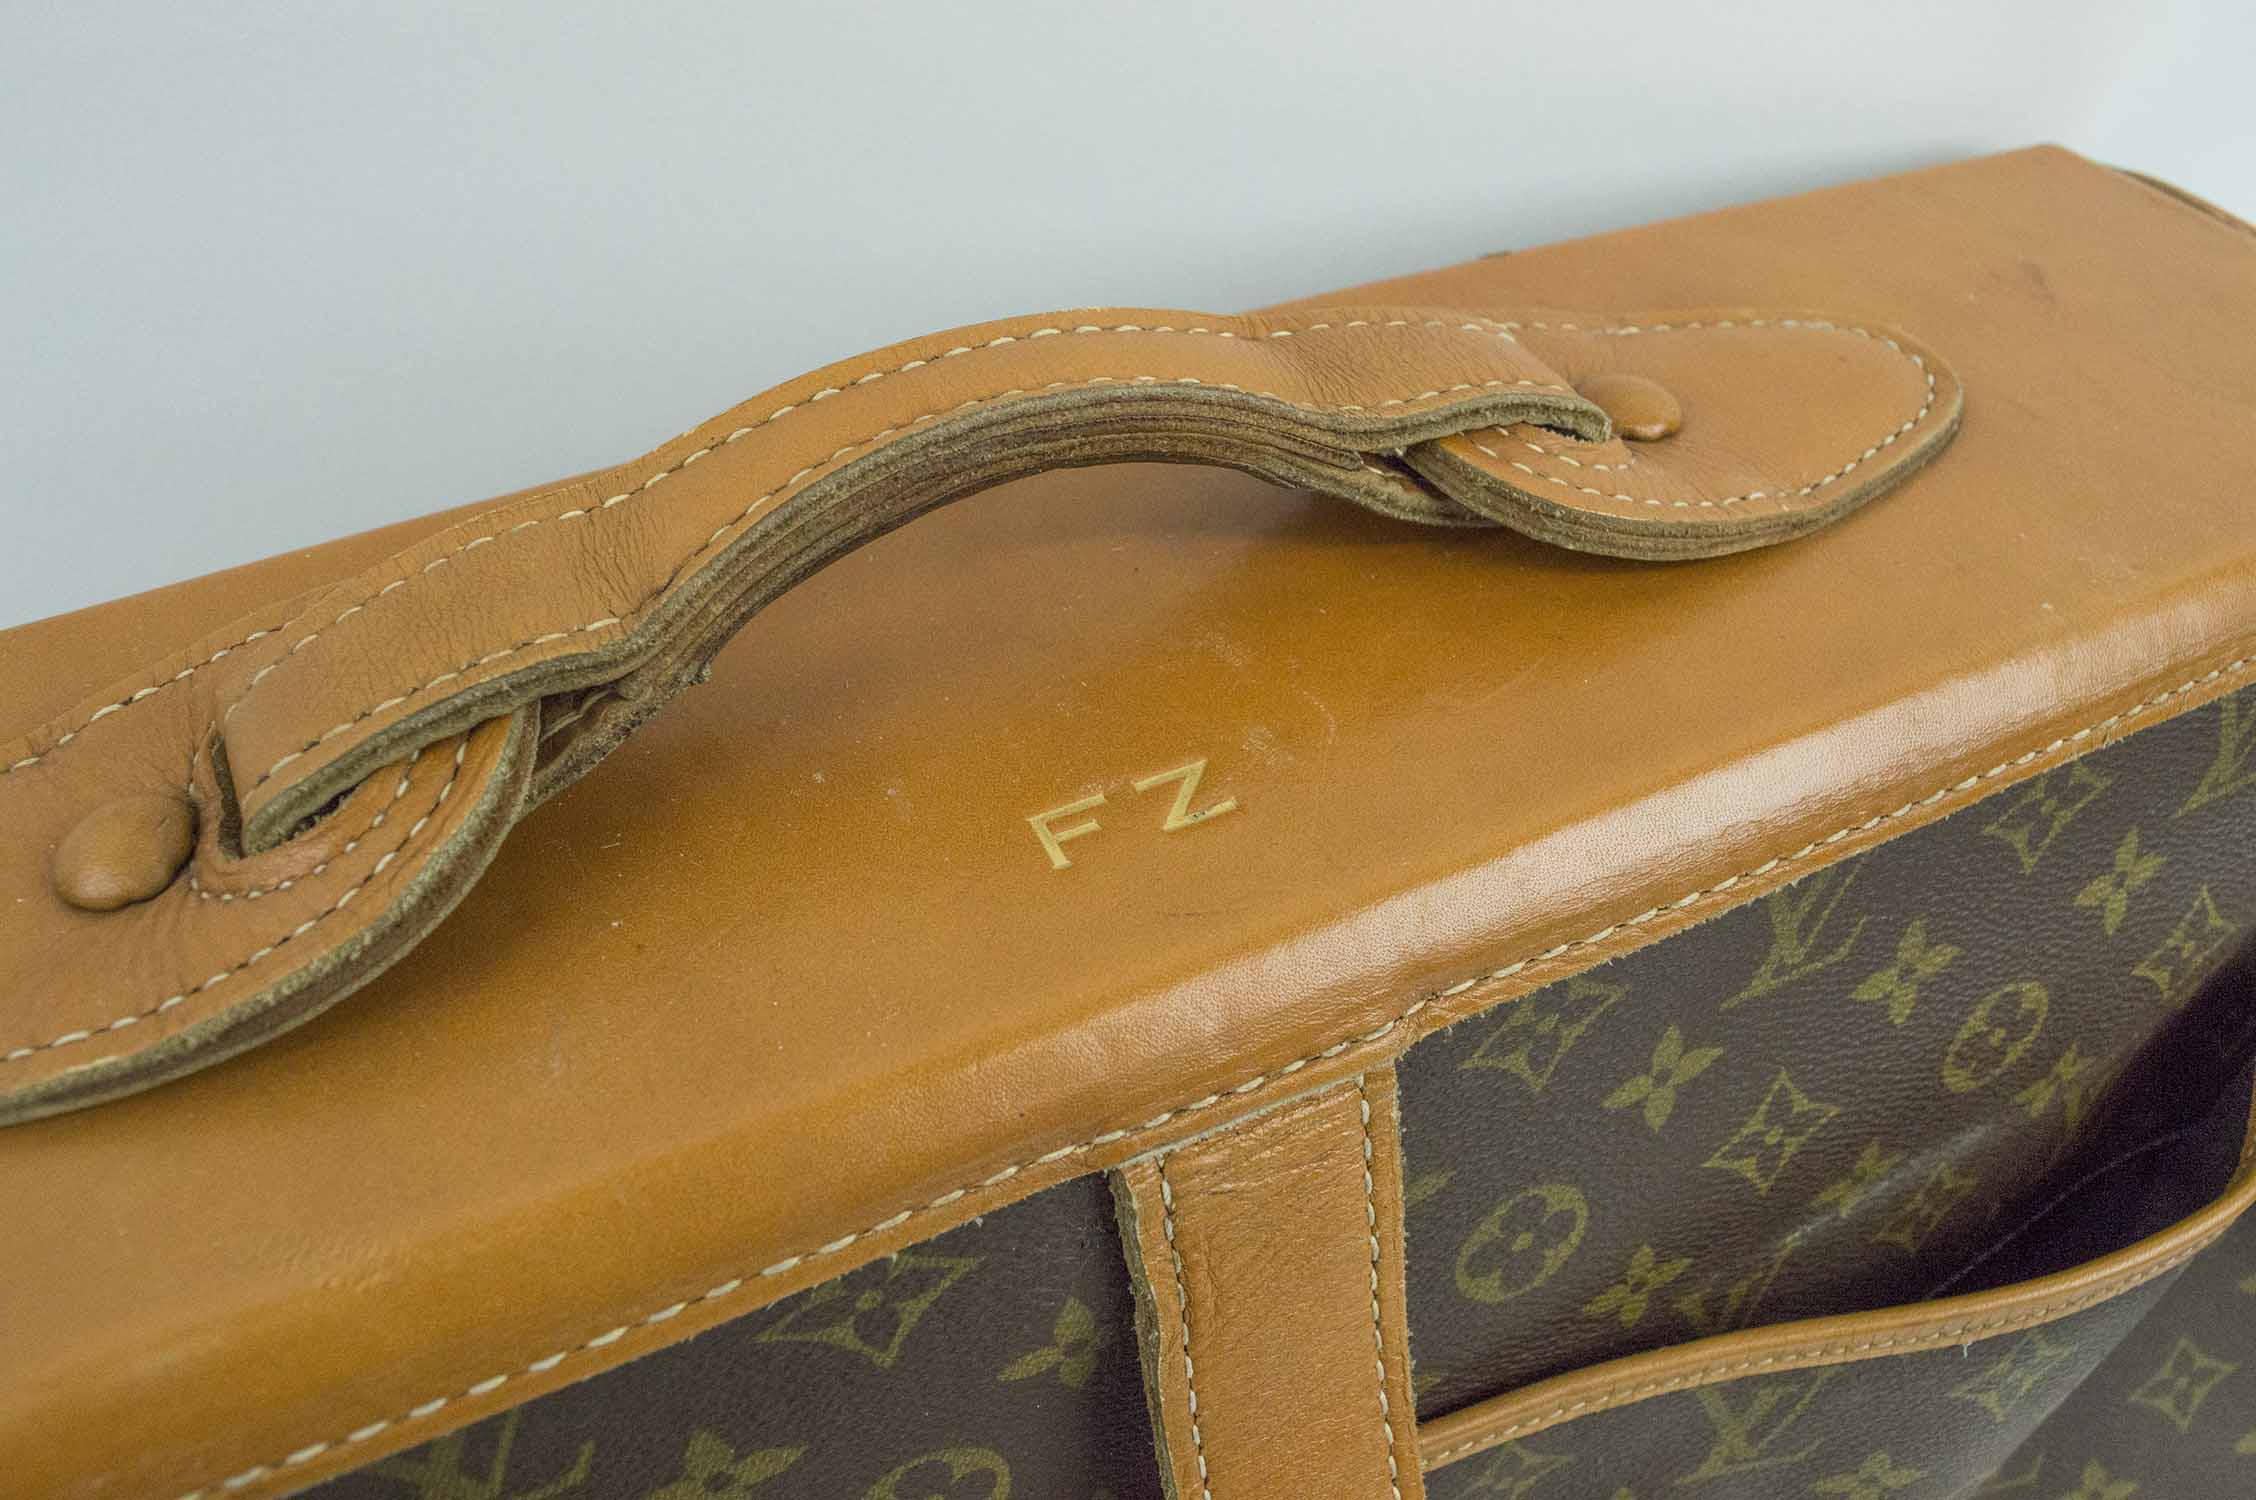 LOUIS VUITTON VINTAGE GARMENT BAG, monogrammed with top handle, manufactured by The French Co, US